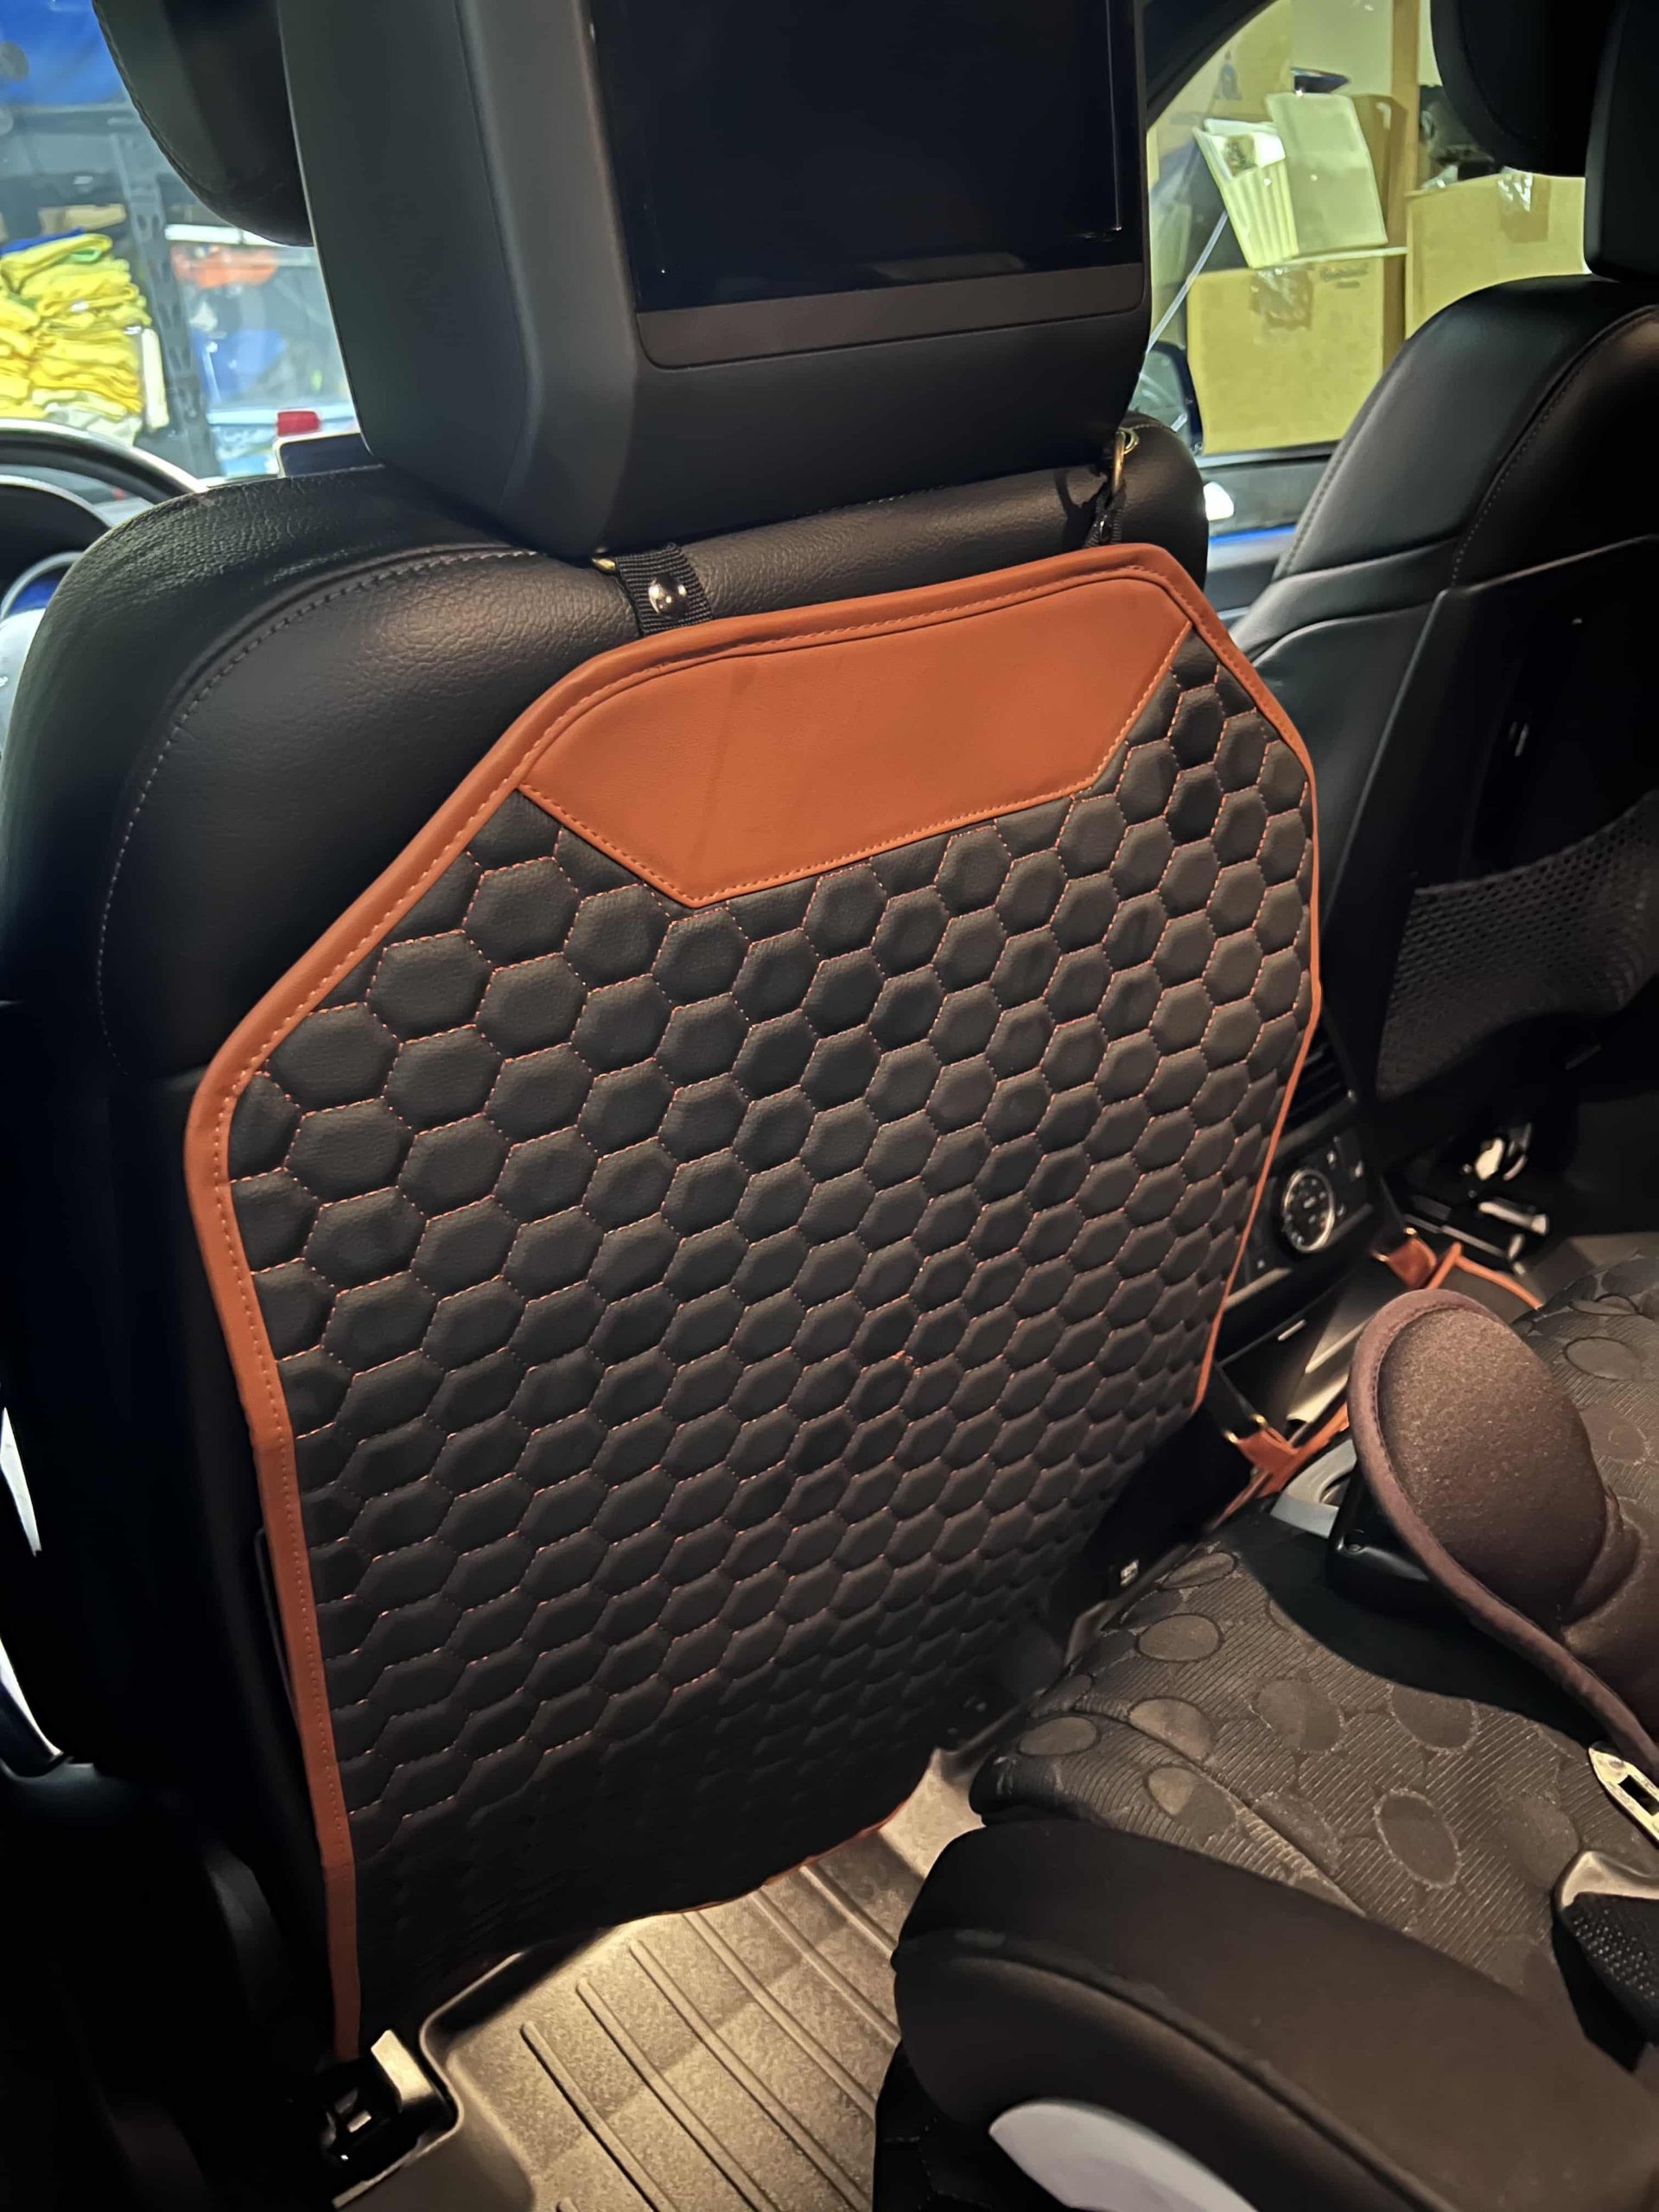 Car Seat Protector Kick Mat Review and Demo on Everyman Driver 